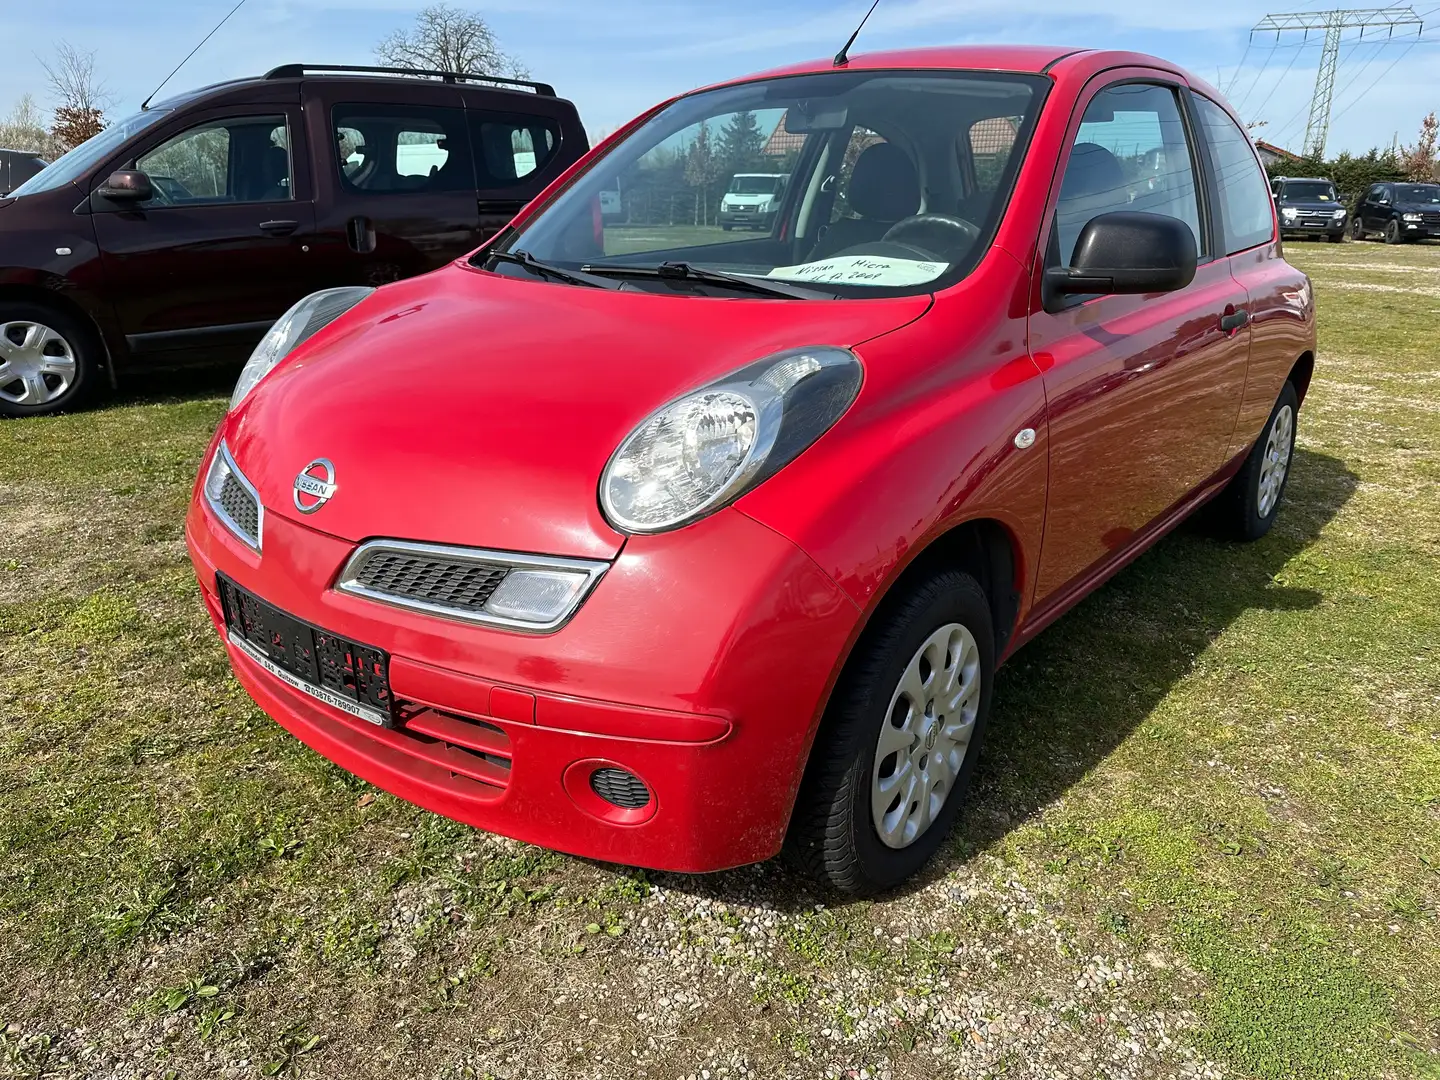 Nissan Micra Rot - 1